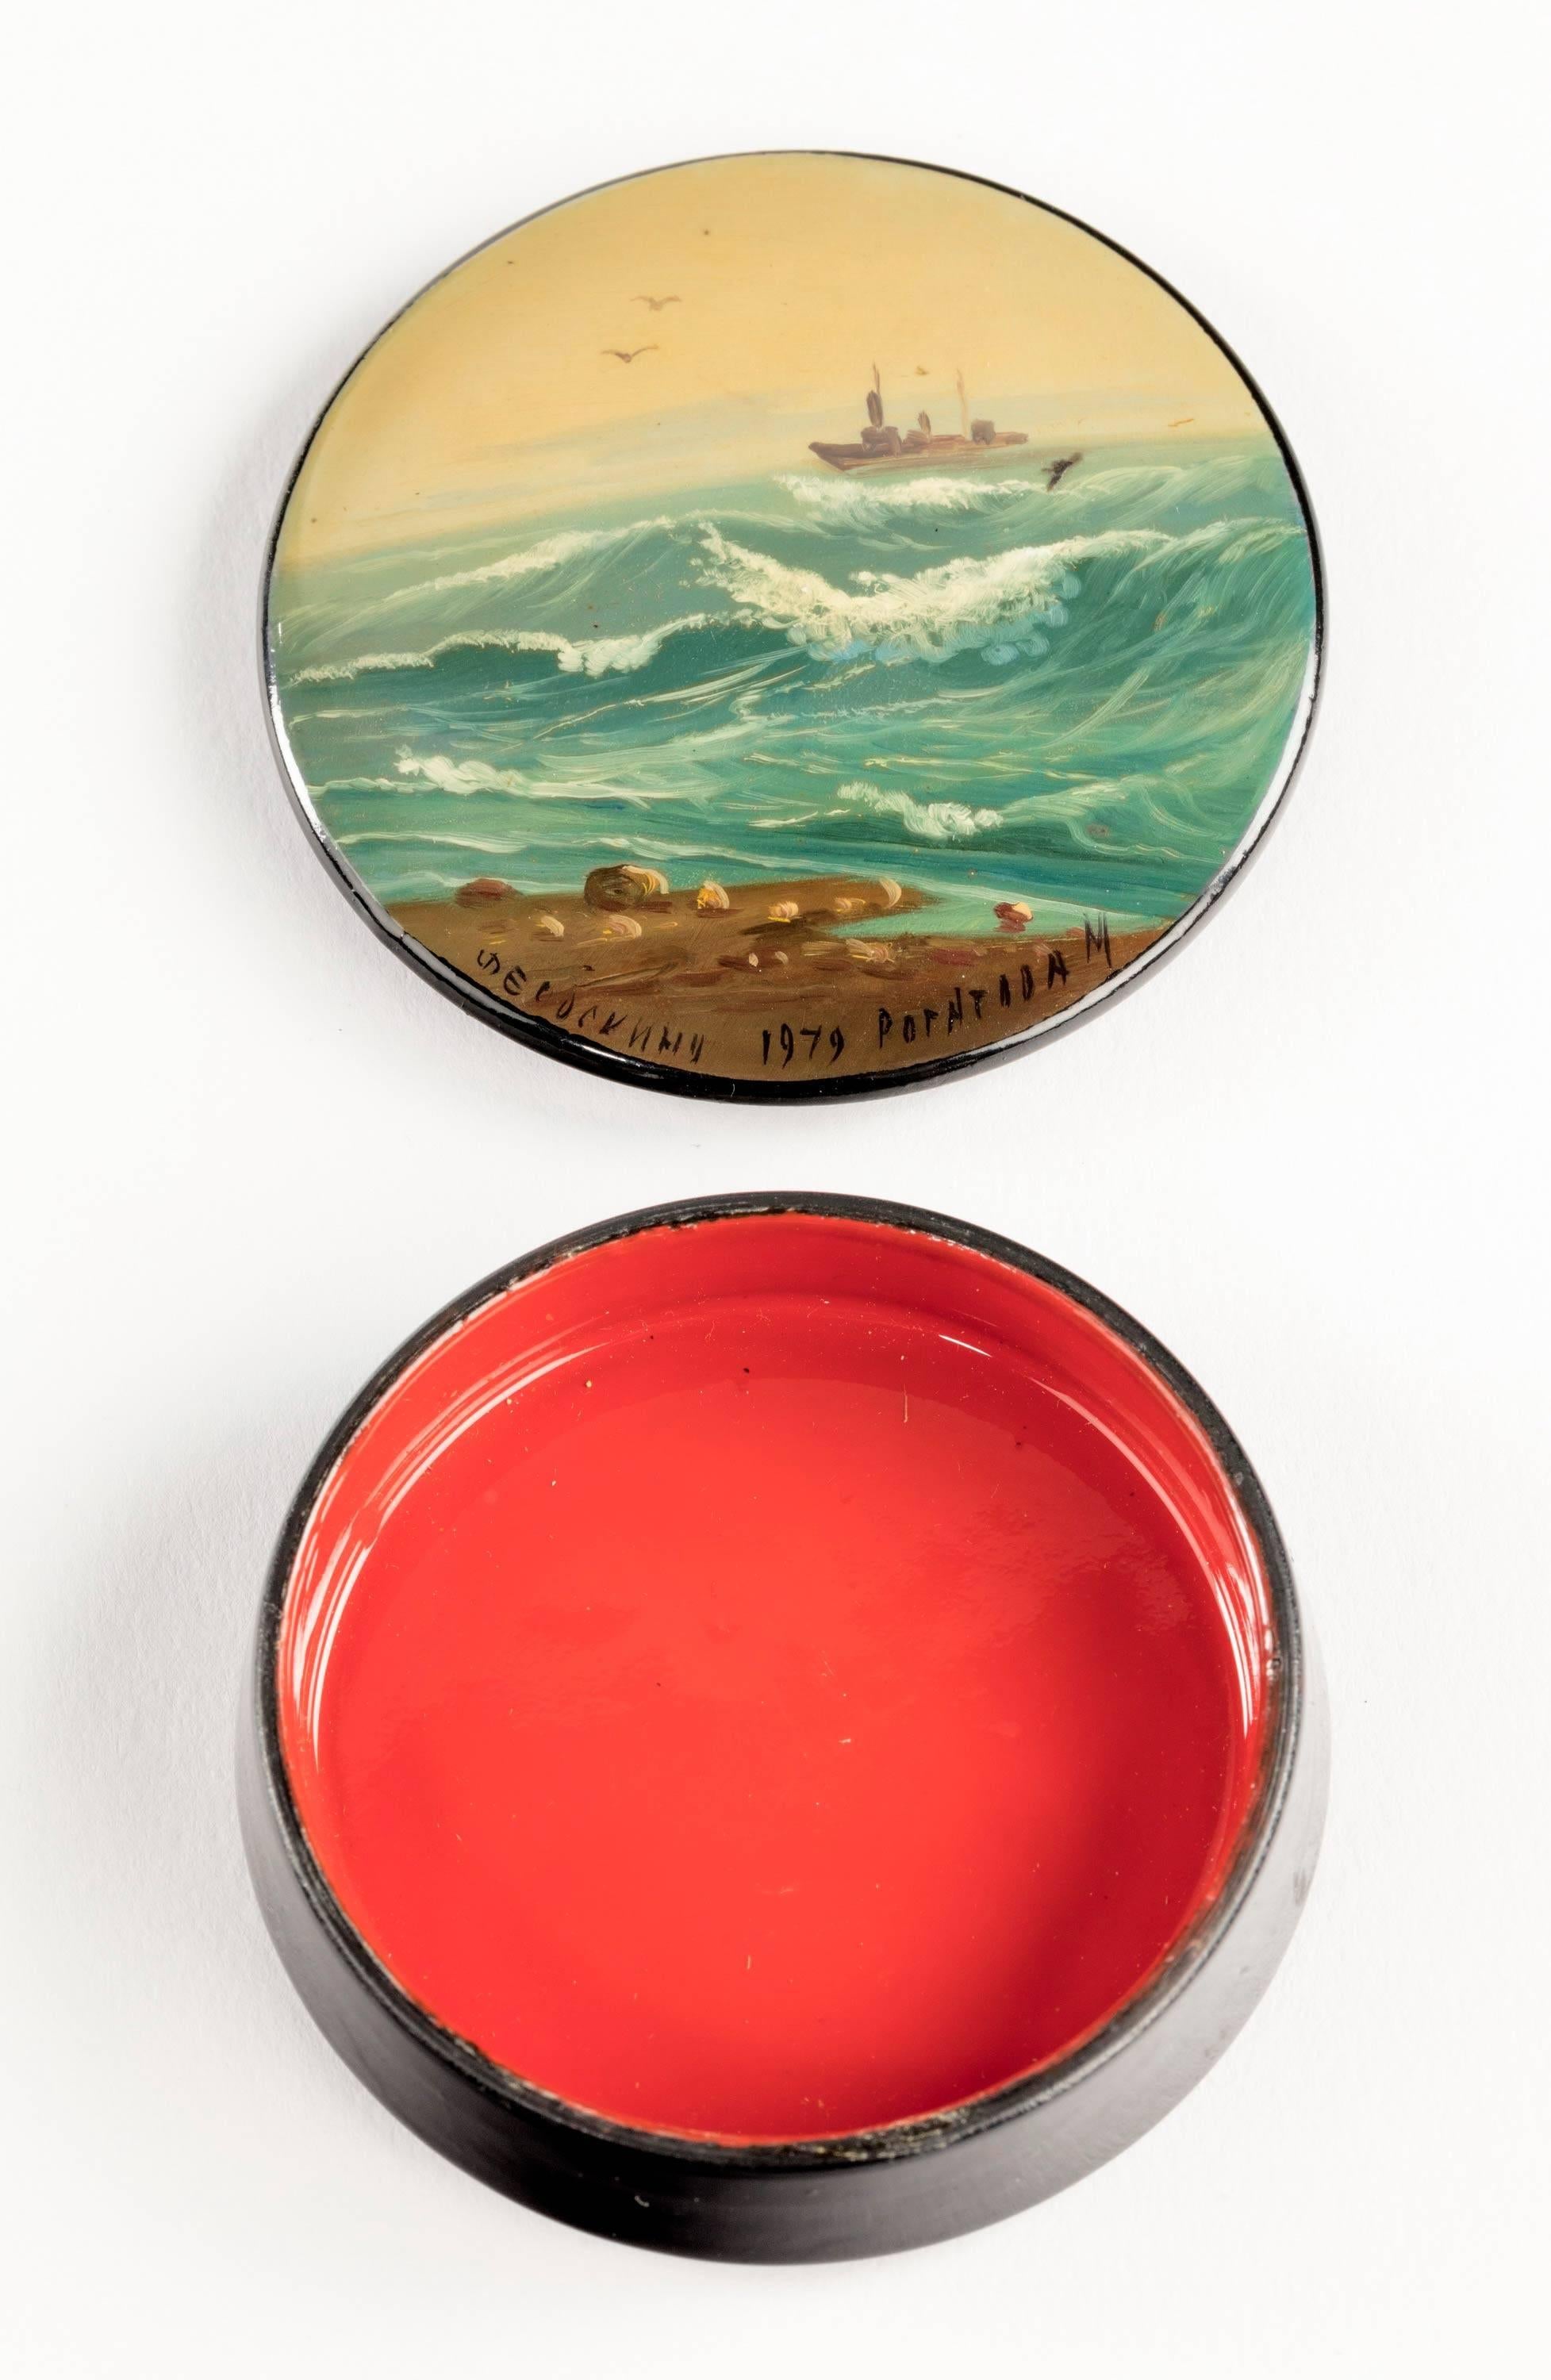 Four Russian lacquered small boxes with hand-painted scenes. Marked on the bases “Made in Russia” 

The oval box

Height 1.75 inches
Diameter 1.75 inches.
       